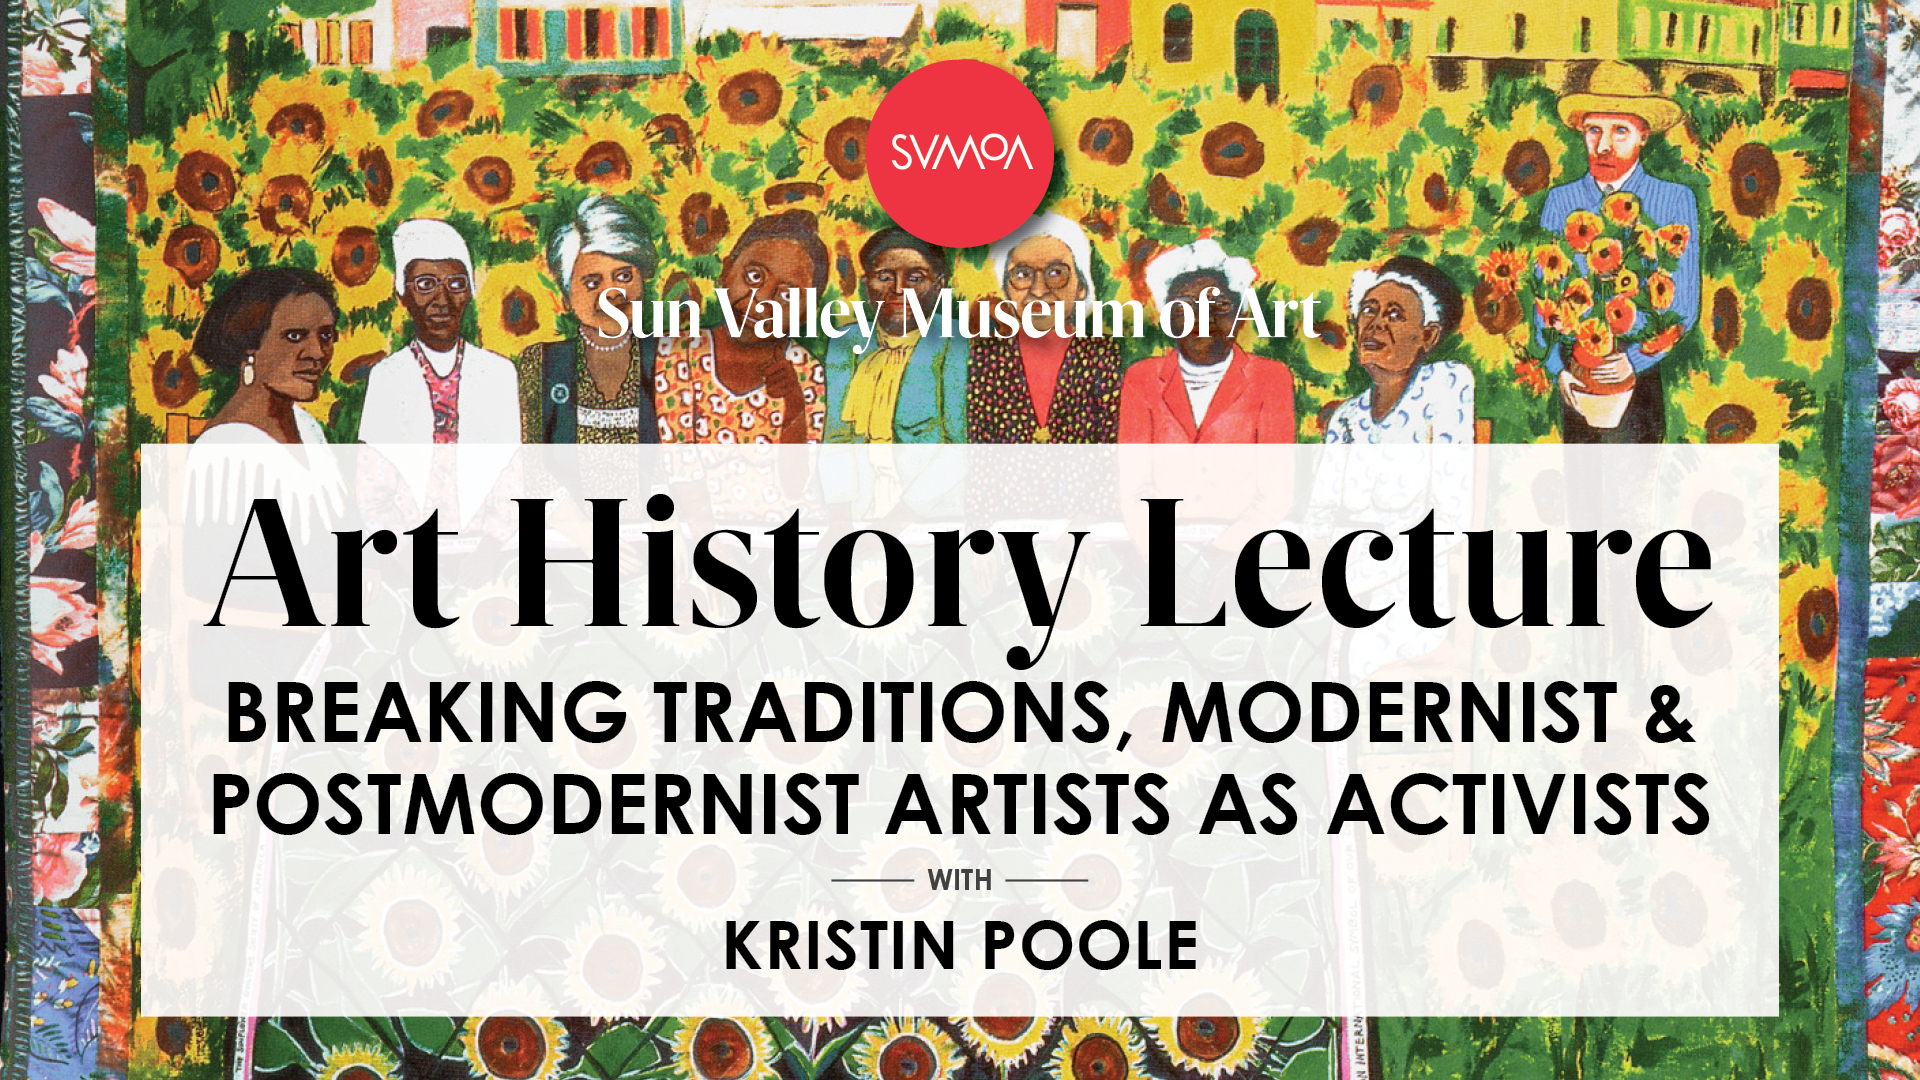 LIVESTREAM ART HISTORY LECTURE: Breaking Traditions, Modernist & Postmodernist Artists as Activists with Kristin Poole